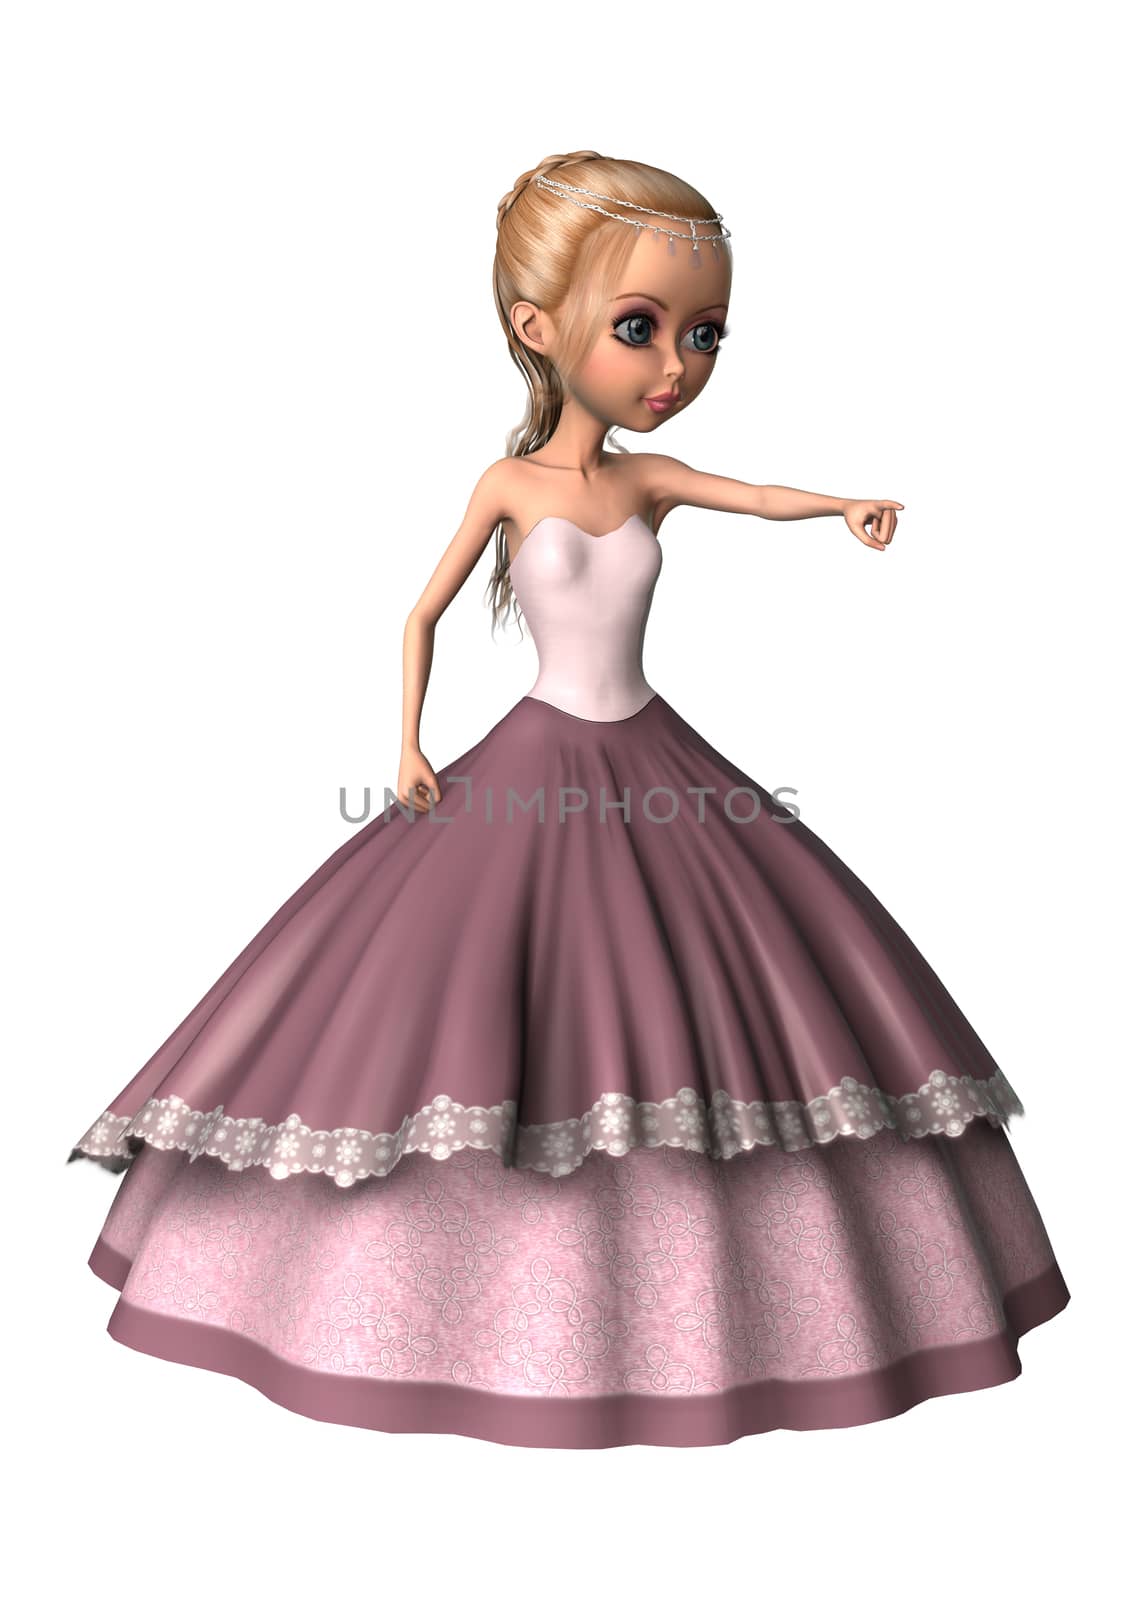 3D digital render of a cute little princess in a pink dress isolated on white background